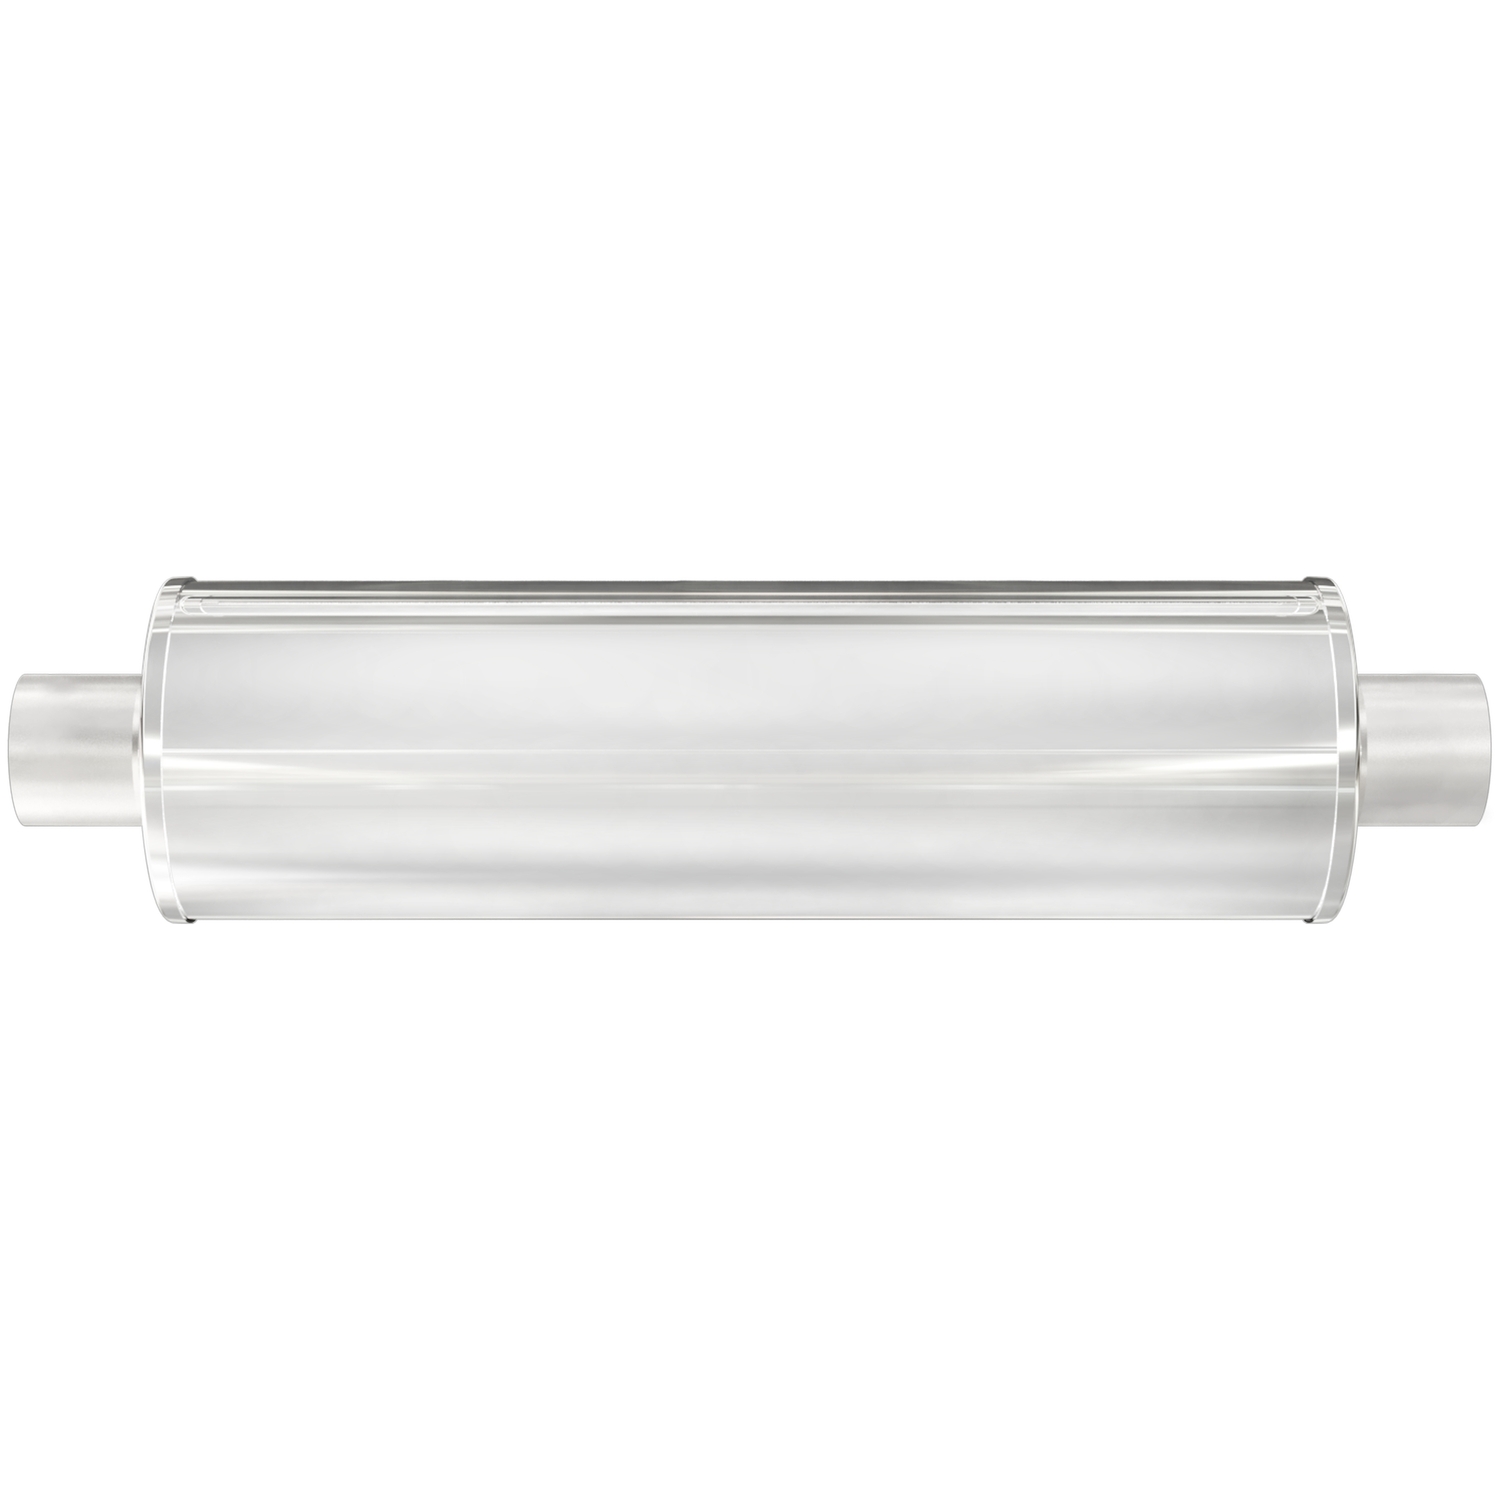 7" Round XL 3-Chamber Muffler Center In/Center Out: 3"/3" Body Length: 24" Overall Length: 30" Satin Finish